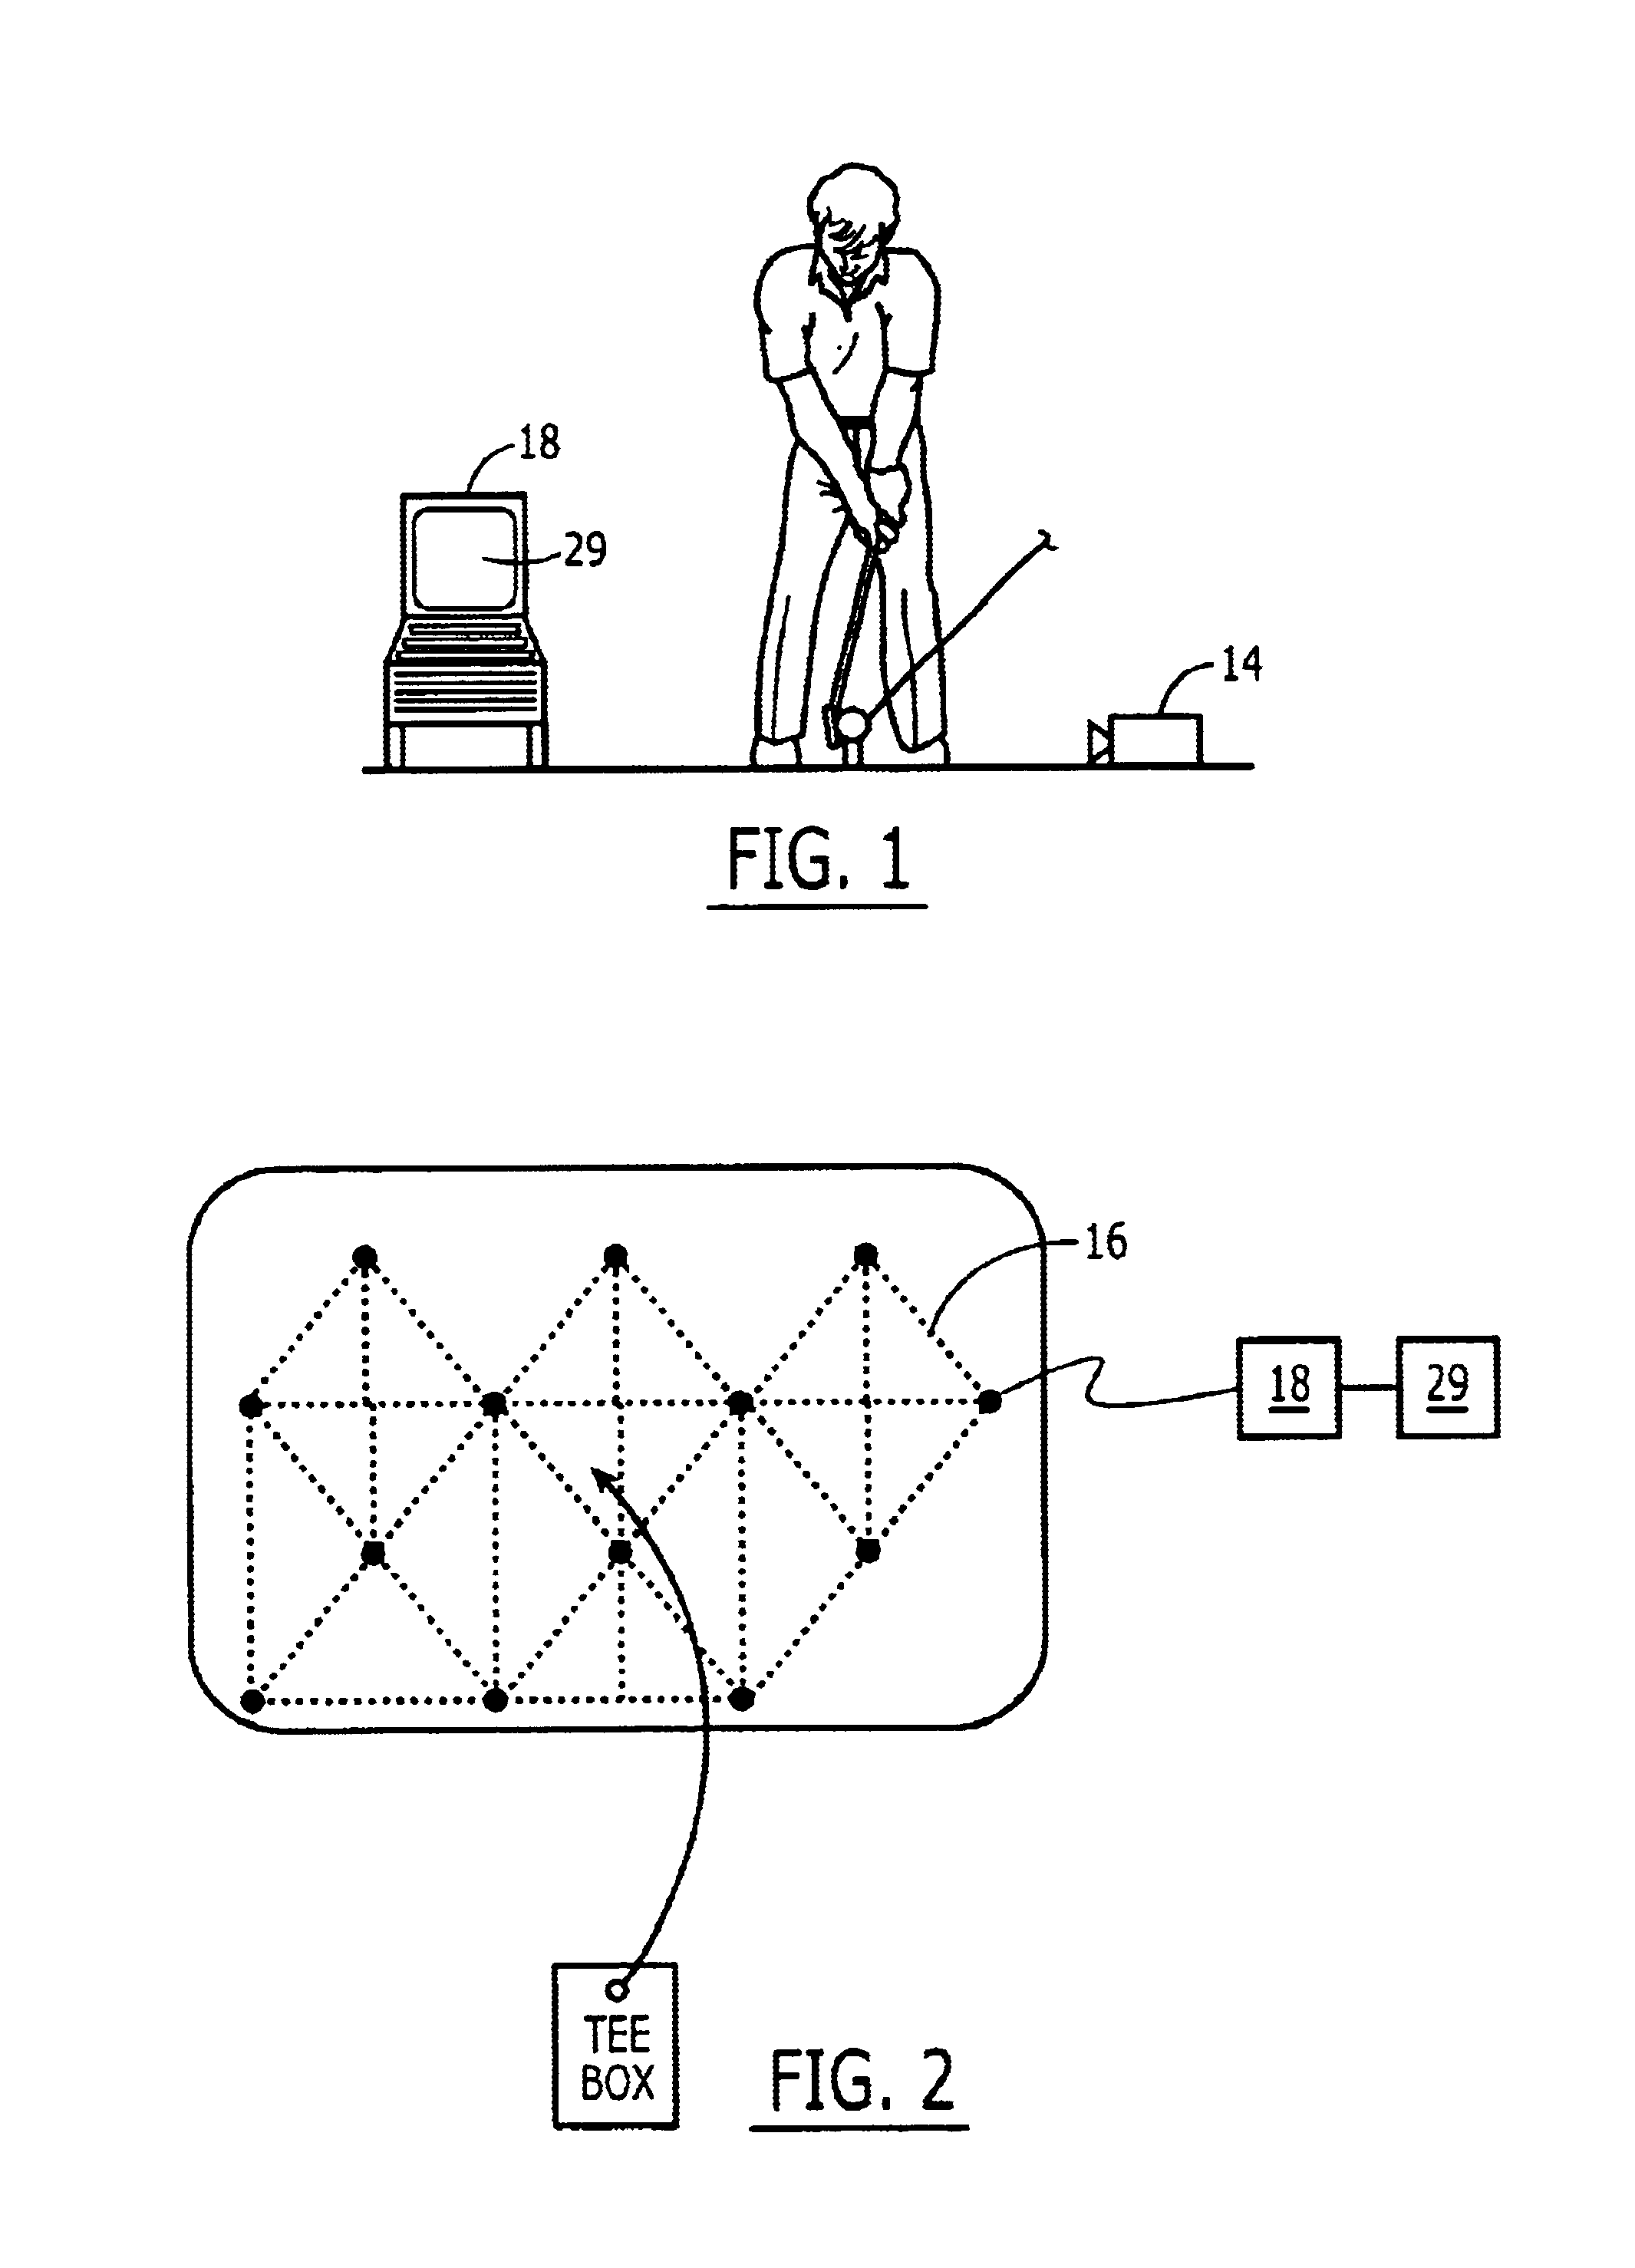 Golf club fitting system and method